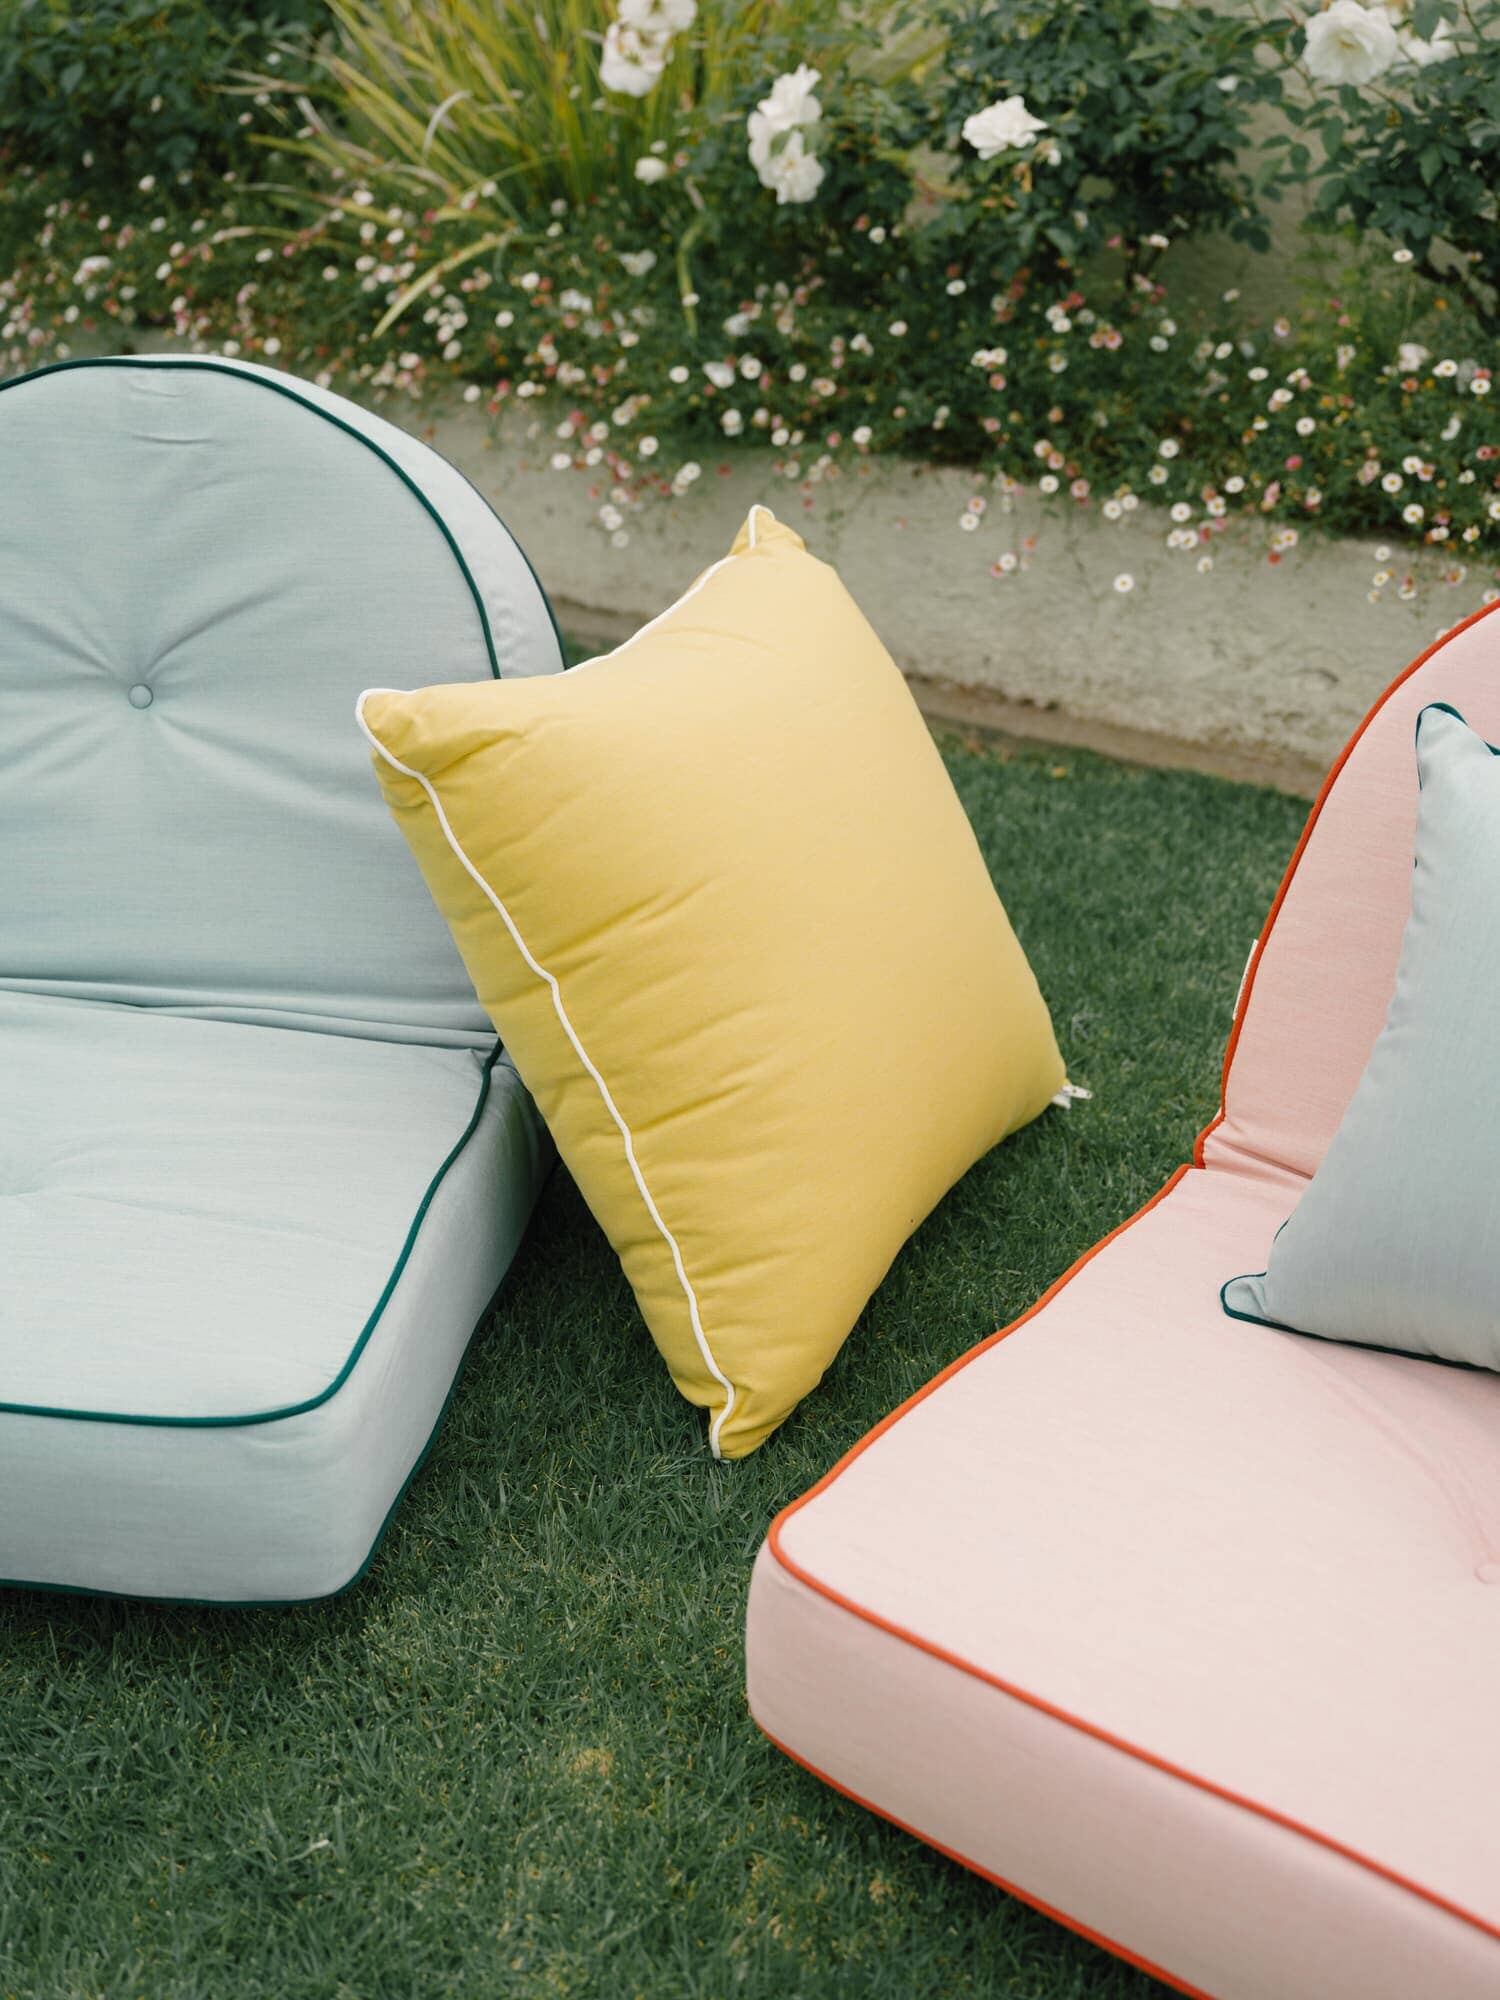 Colored outdoor cushions on grass